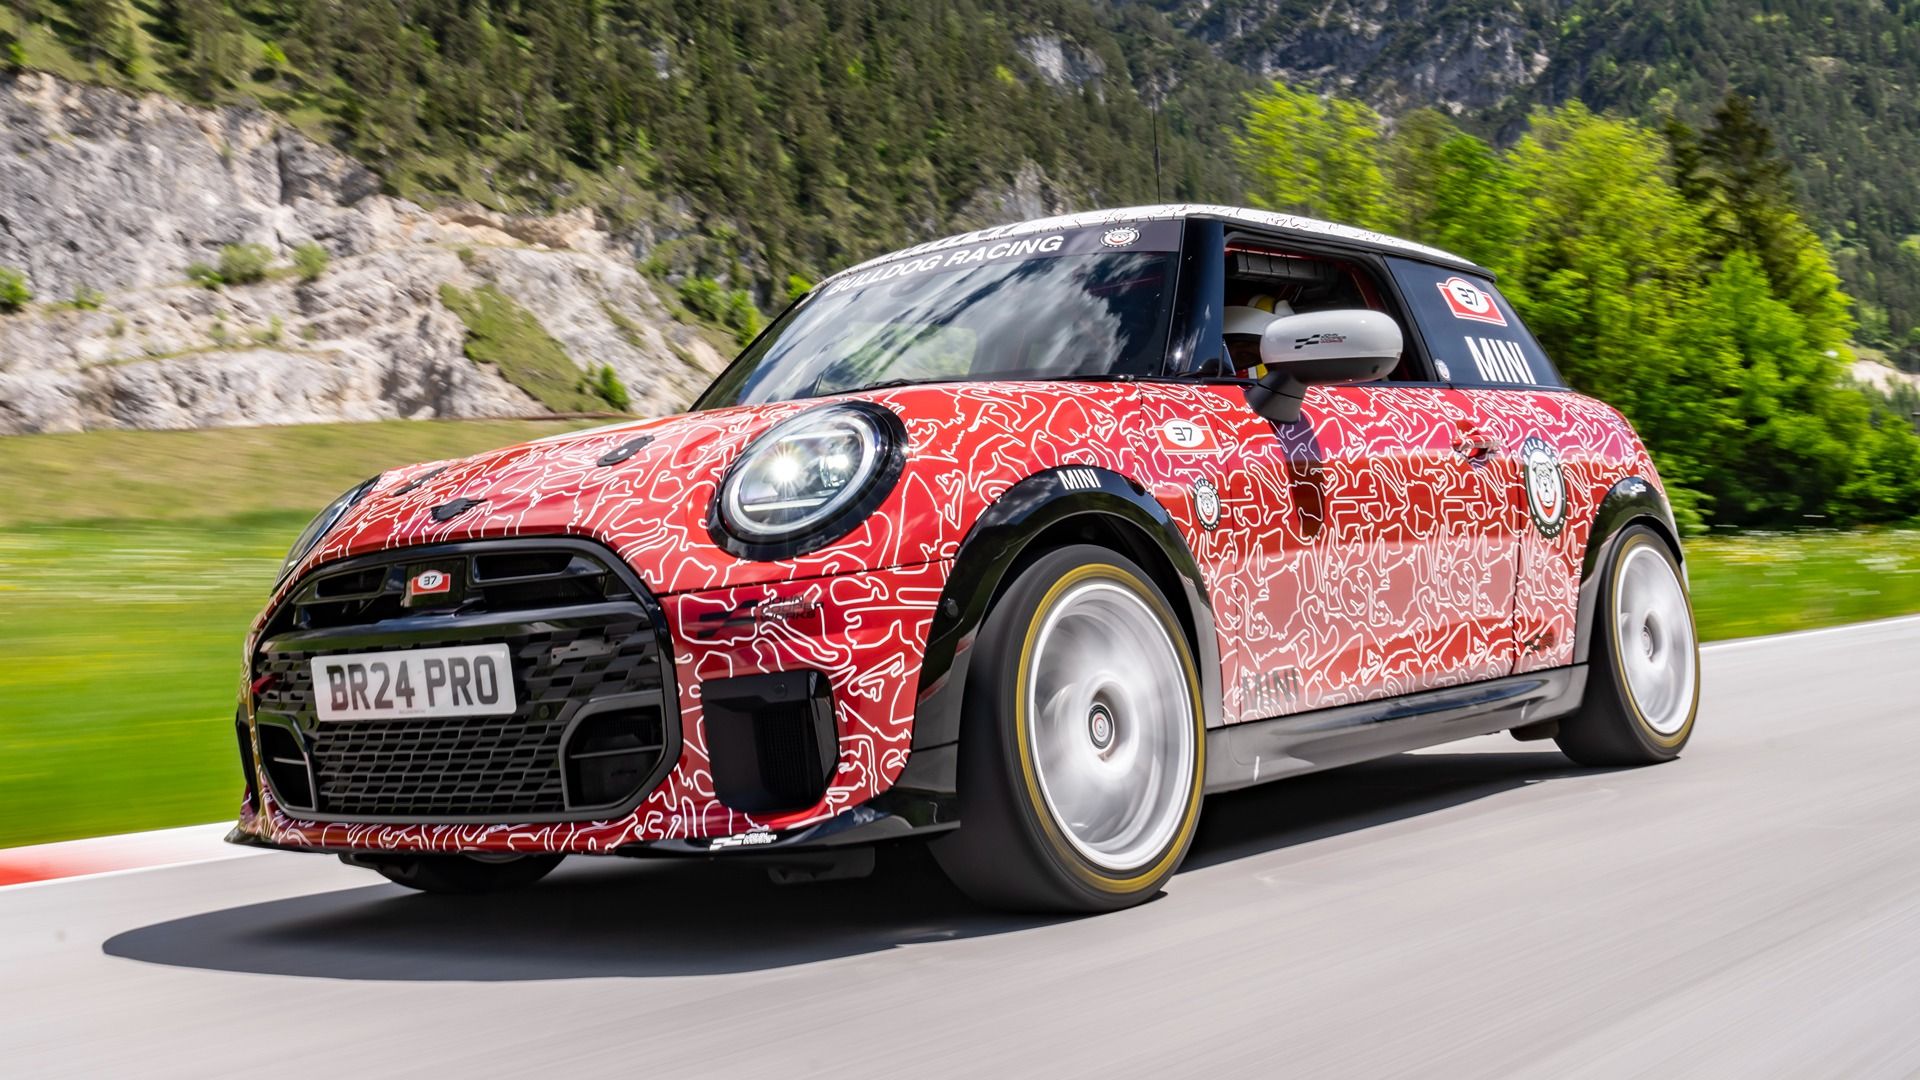 Mini Cooper Hardtop JCW To Debut In 24 Hours Of Nrburgring Race